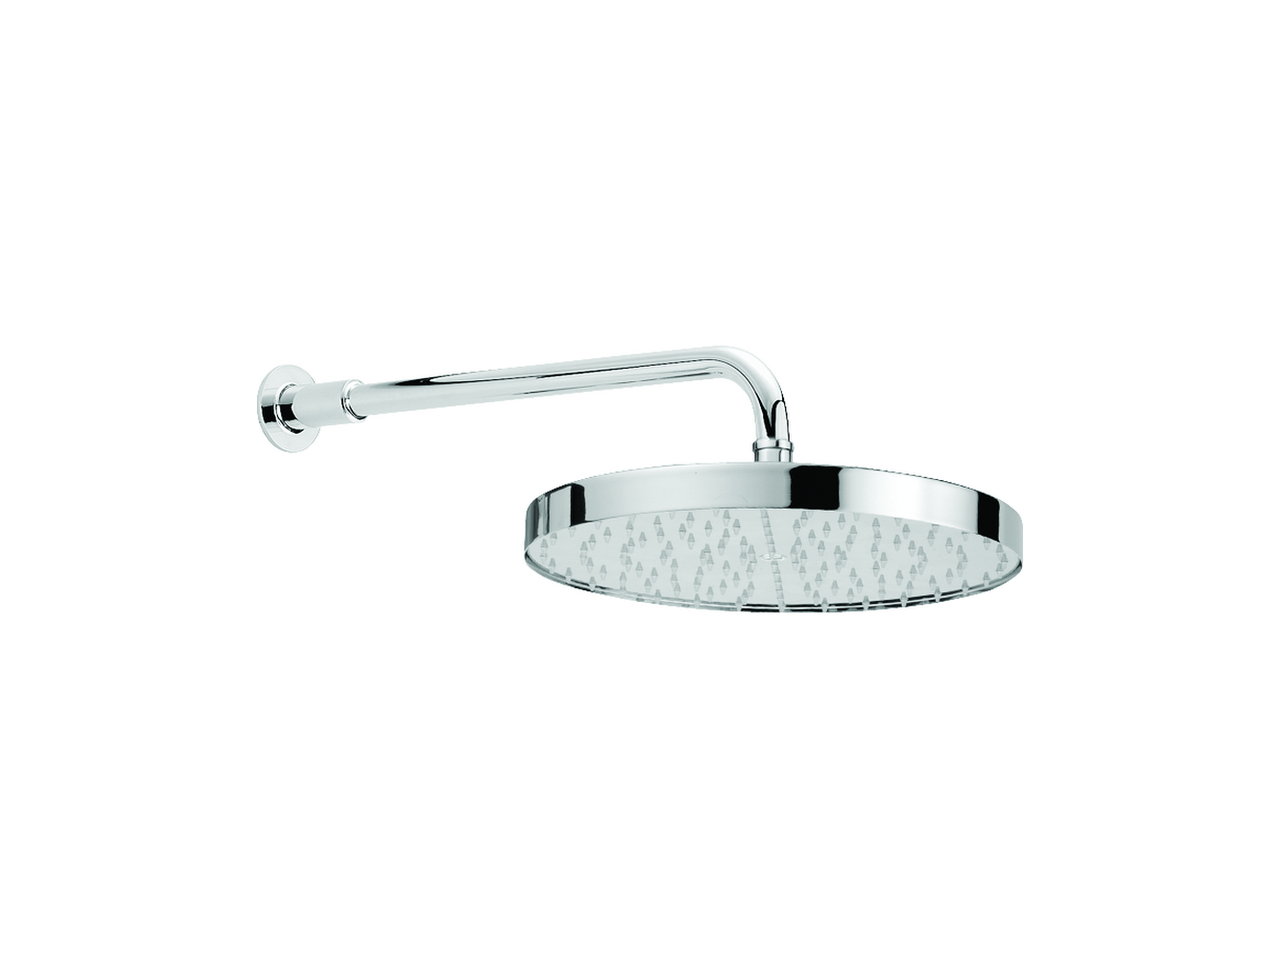 HUBERShower arm with Suite showerhead SHOWER